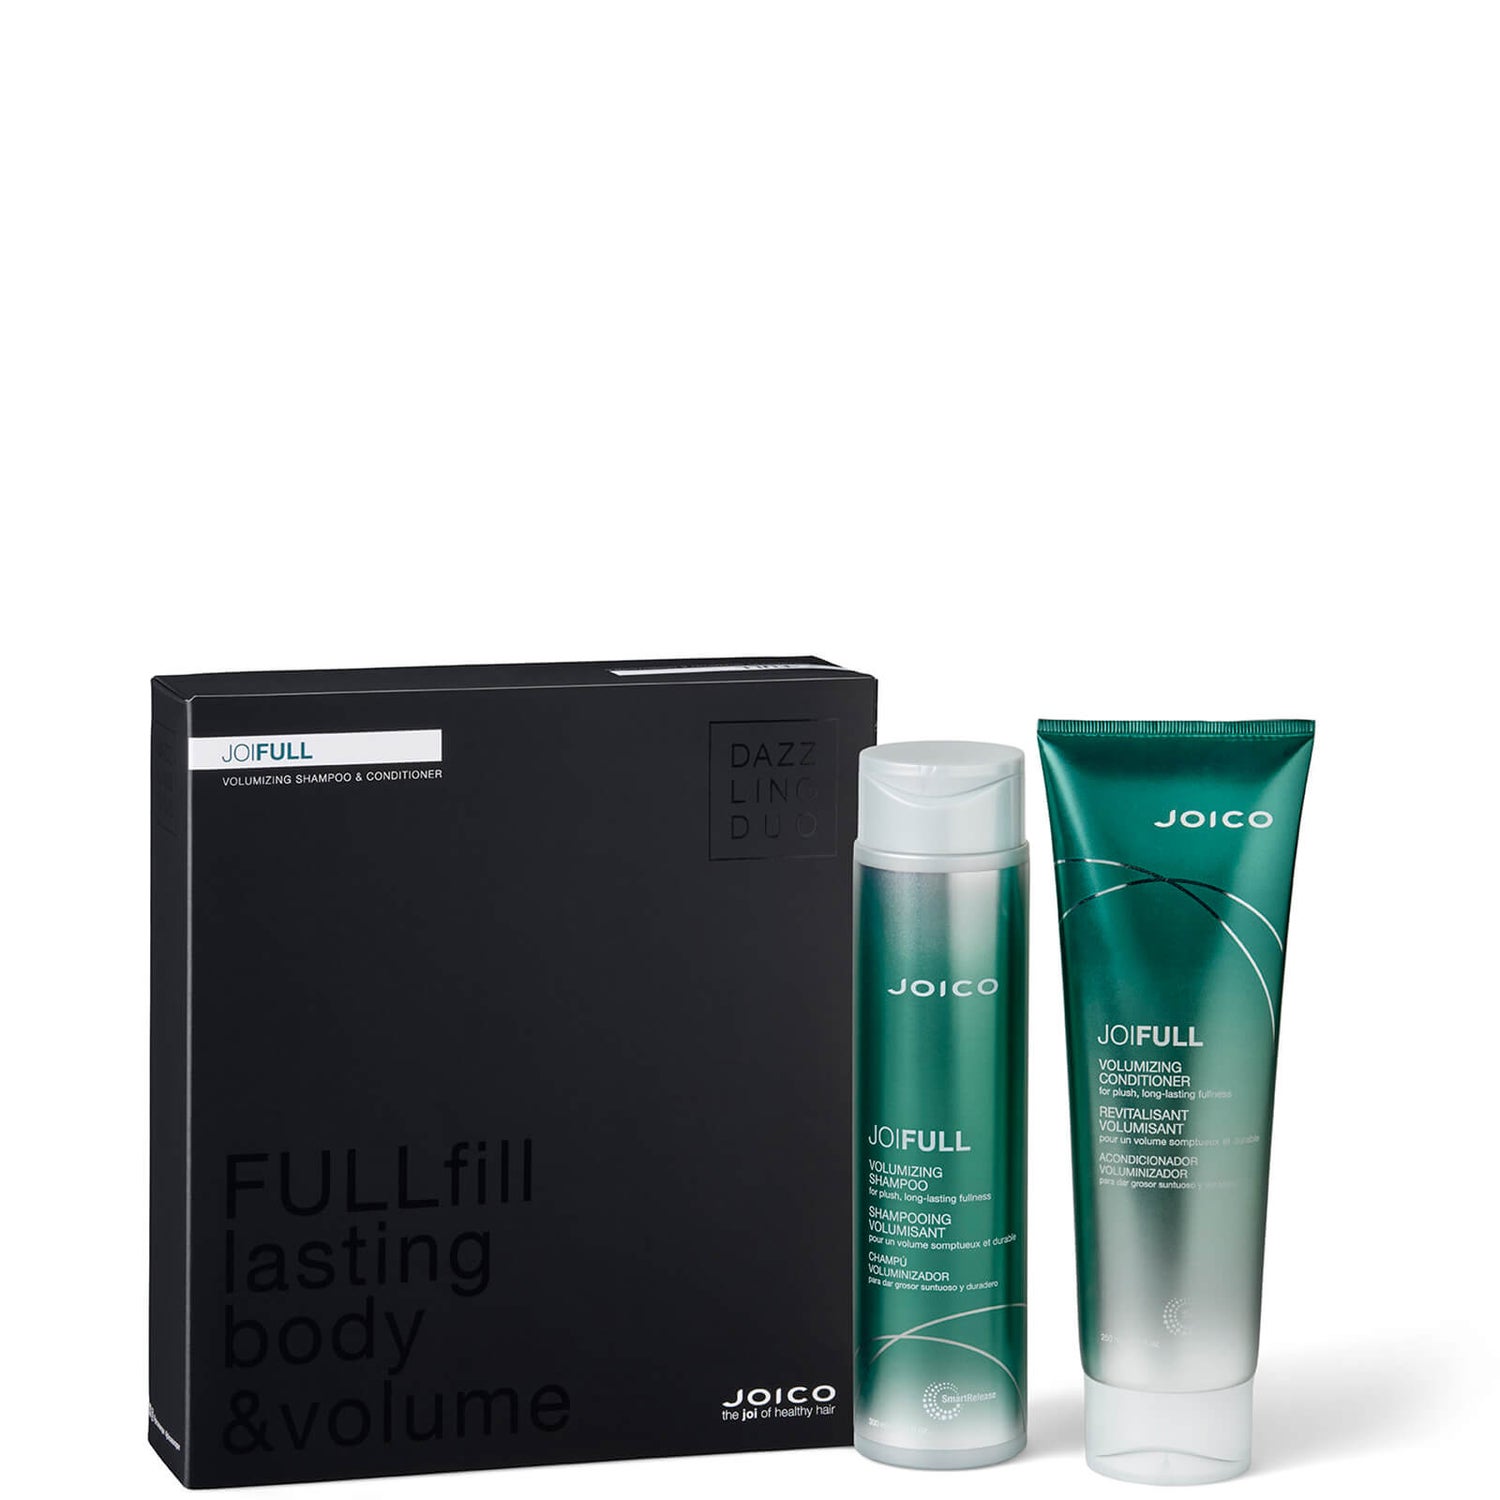 JOICO JoiFull Shampoo and Conditioner Dazzling Duo -duo